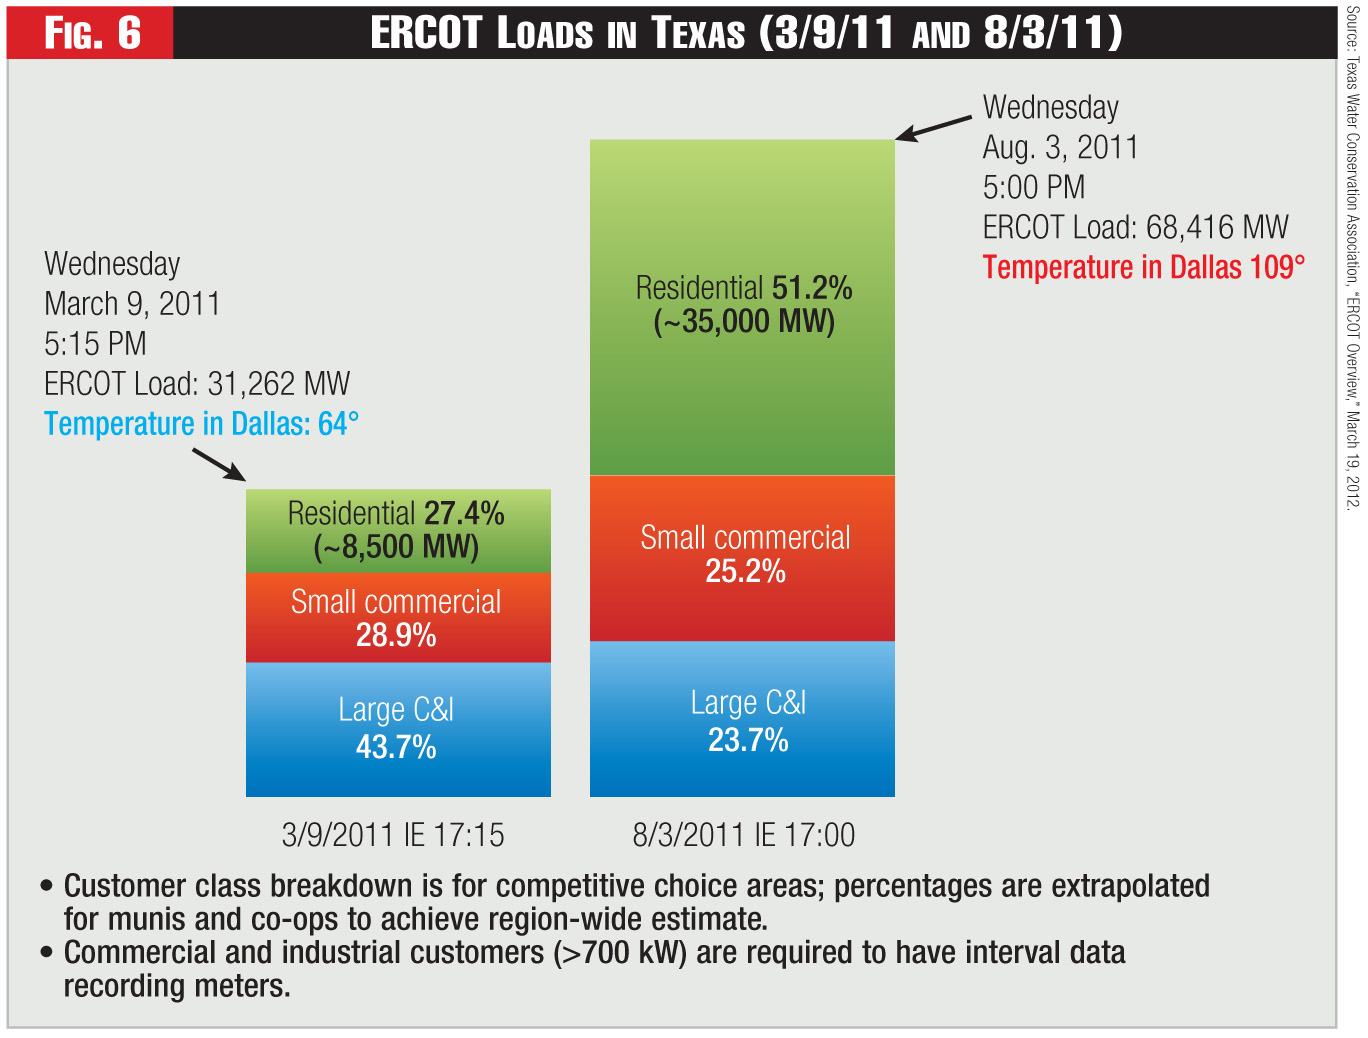 Figure 6 - ERCOT Loads in Texas (3/9/11 and 8/3/11)